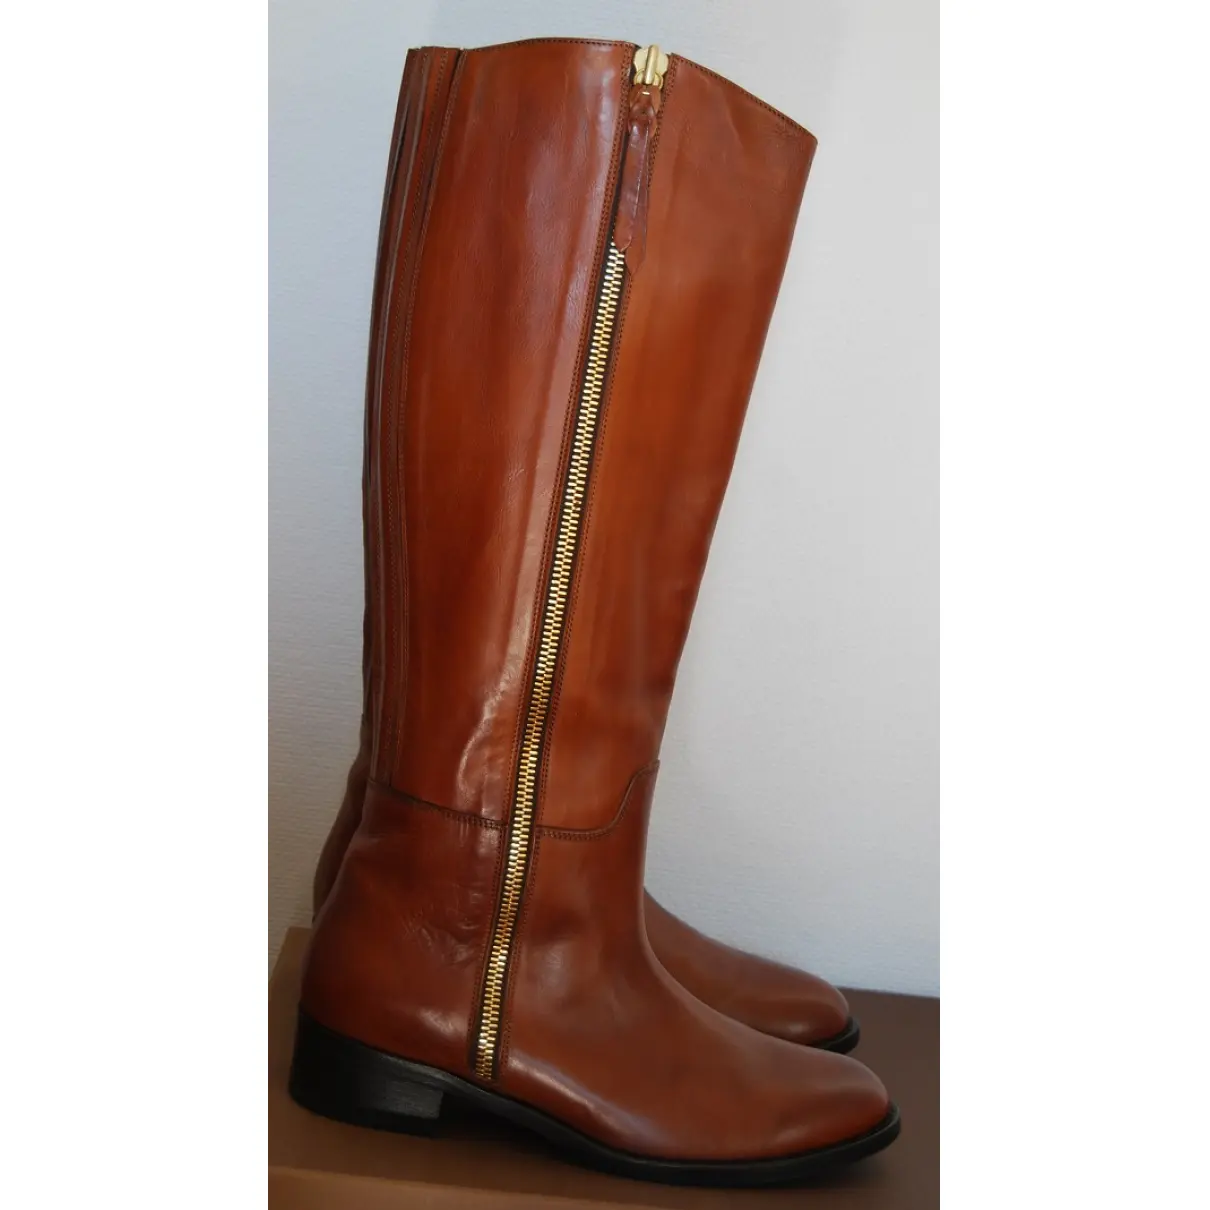 Buy Buttero Leather boots online